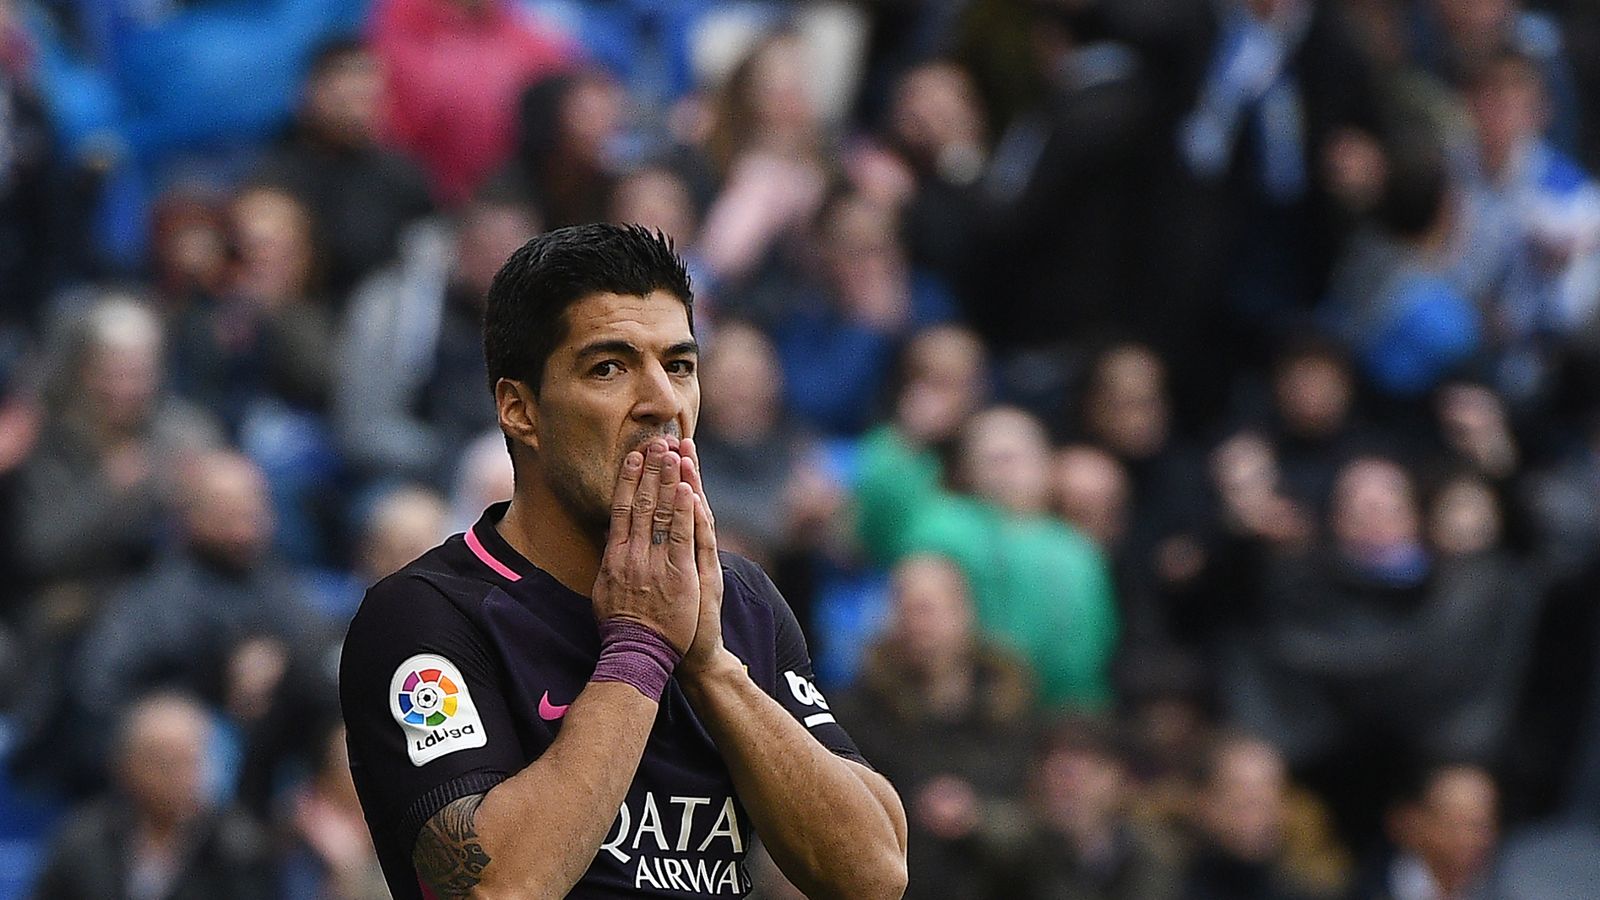 Luis Enrique PSG win took its toll on Barcelona in Deportivo defeat